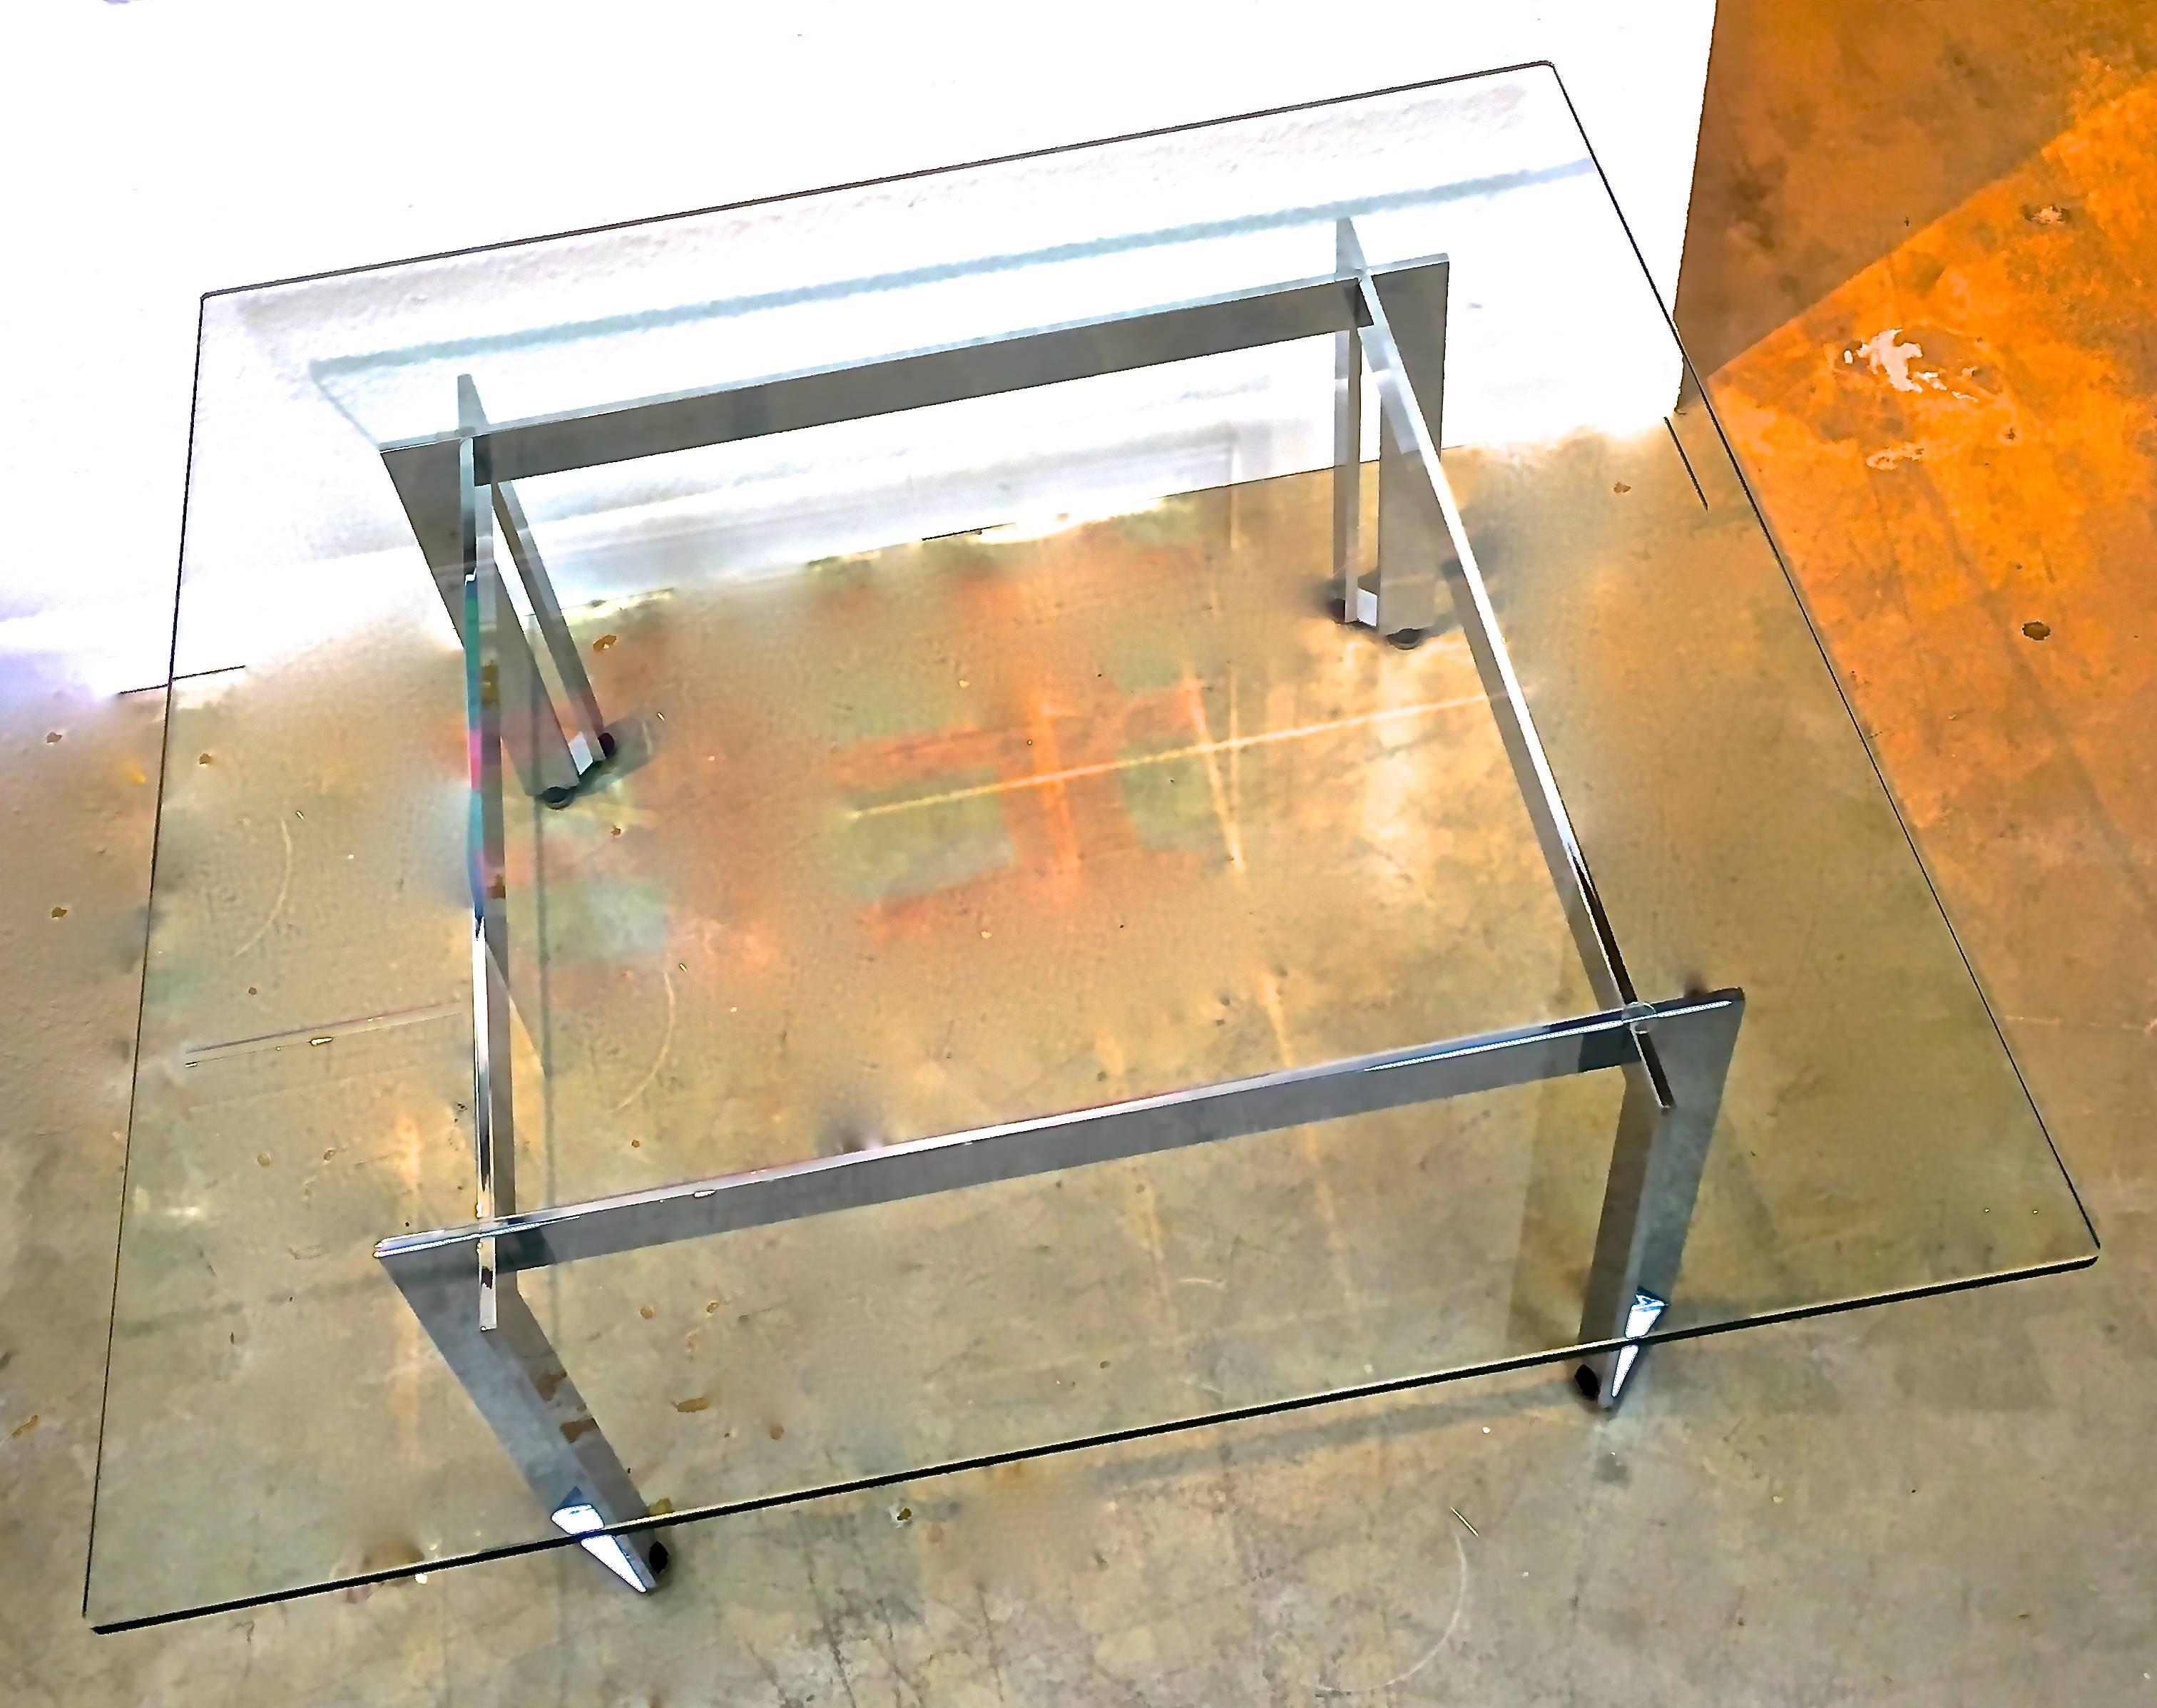 The intersecting chrome corner beams create unique angled legs that differentiate this table from the more ubiquitous Mid-Century table design. Architectural and substantial it supports a 1/2